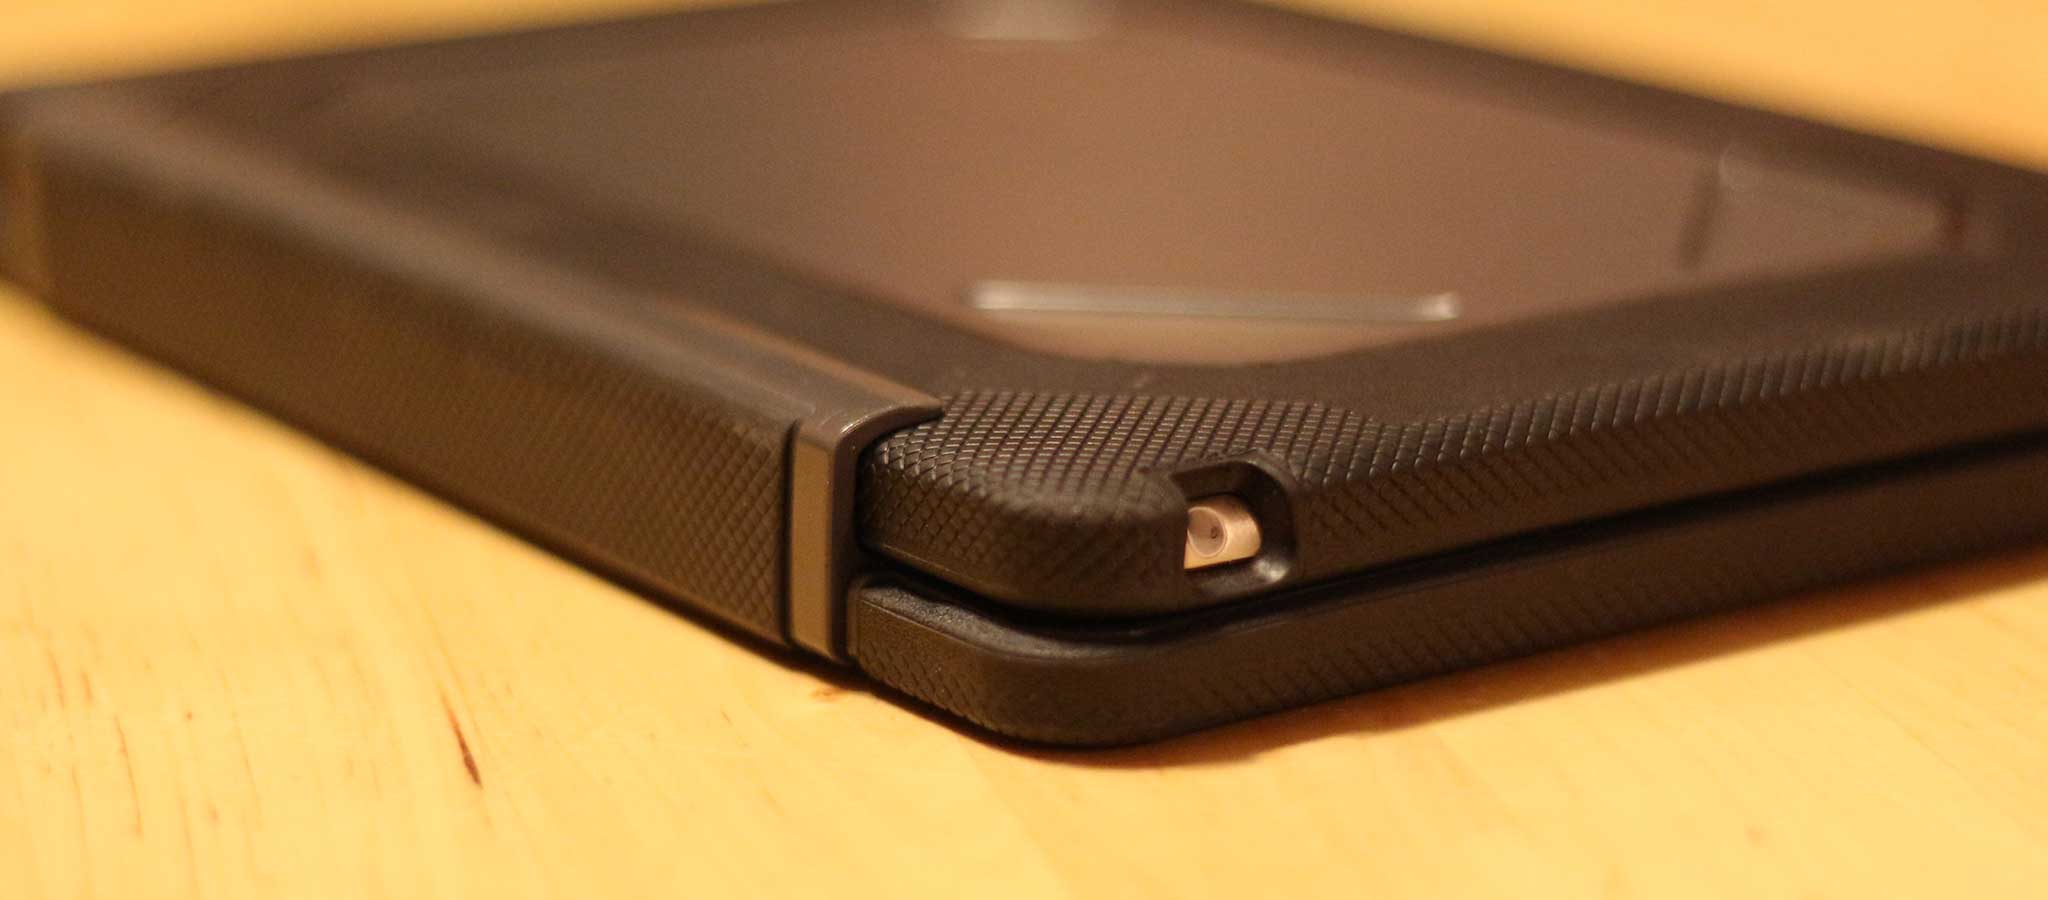 zagg rugged case review